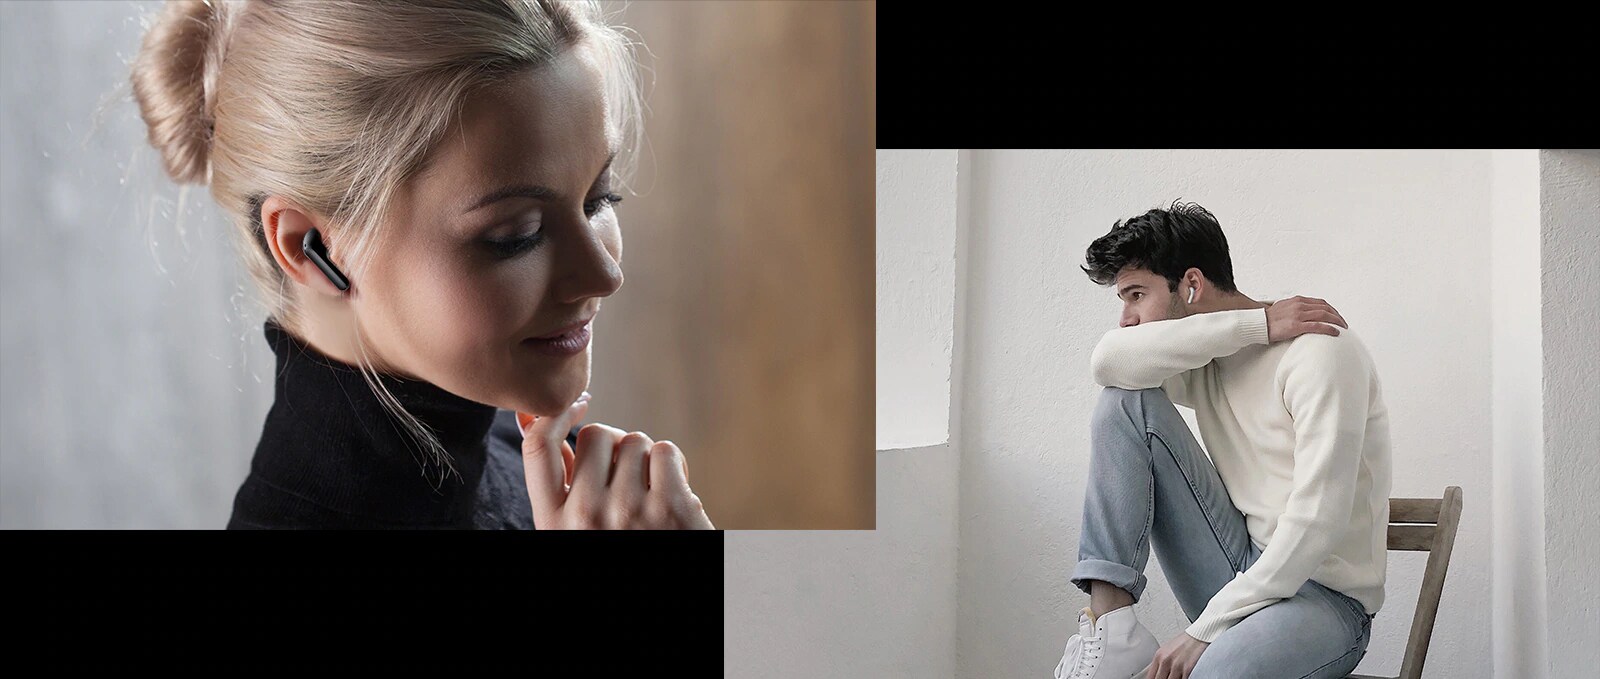 Images of a woman wearing a black earbud and a man wearing a white earbud